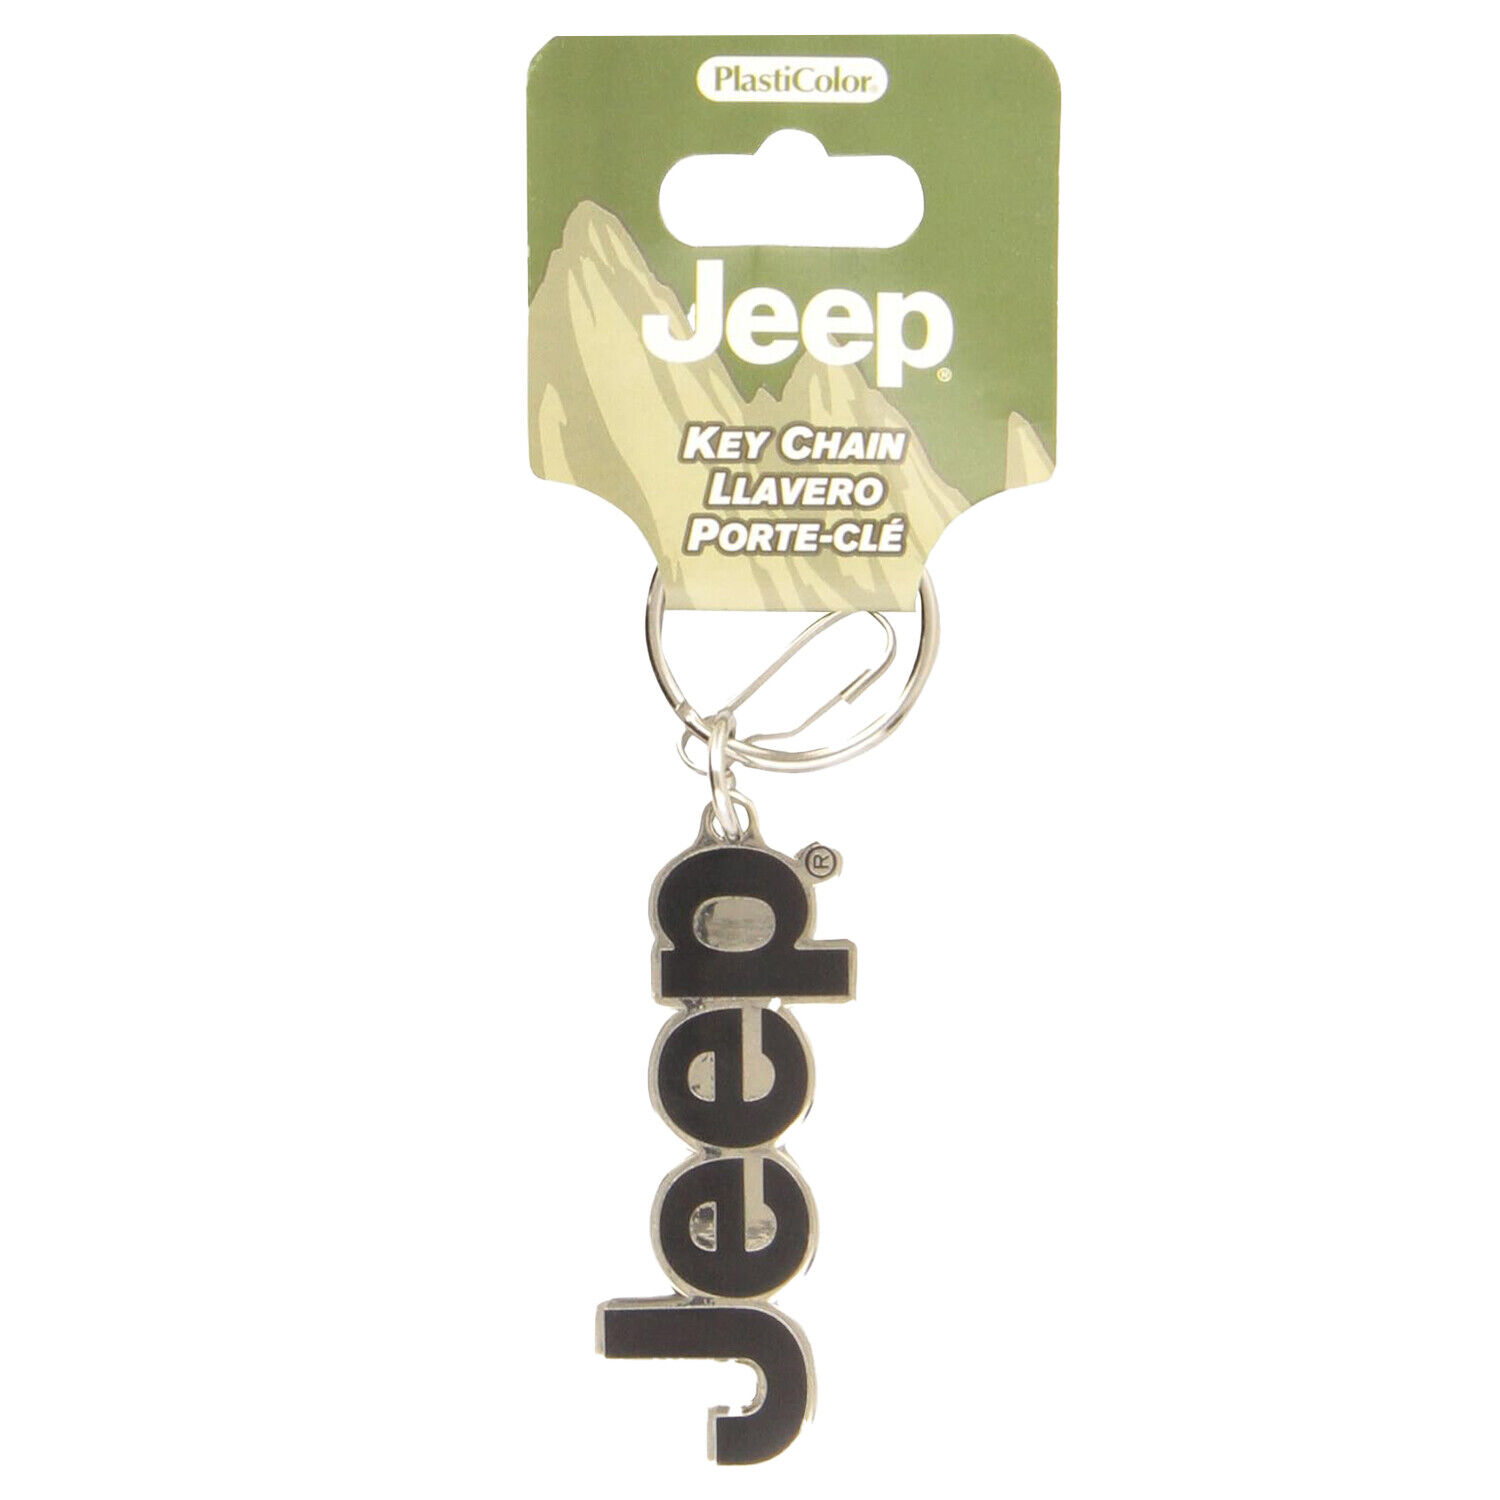 Plasticolor Jeep Keychain with Sturdy Metal Construction